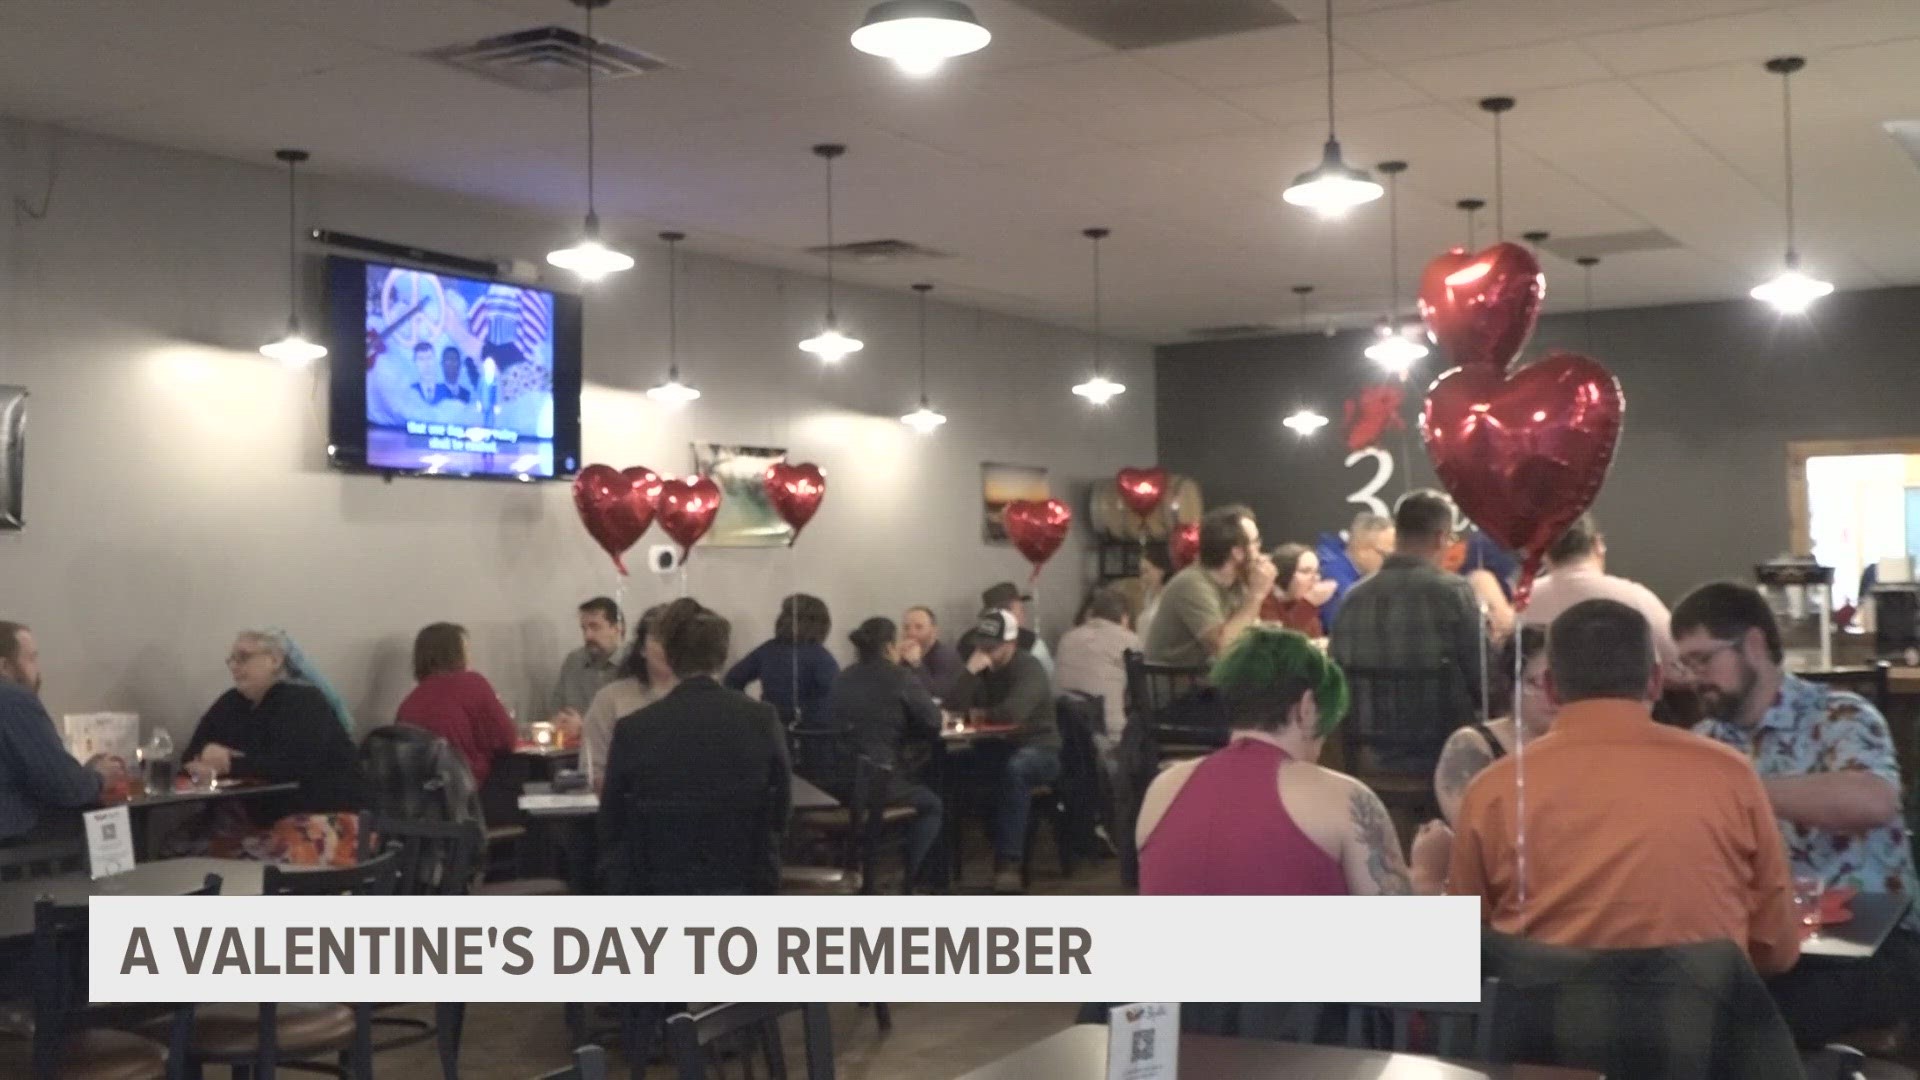 It was the 3 Gatos Brewery first ever Valentine's Day dinner and the restaurant also had a special treat for customers.